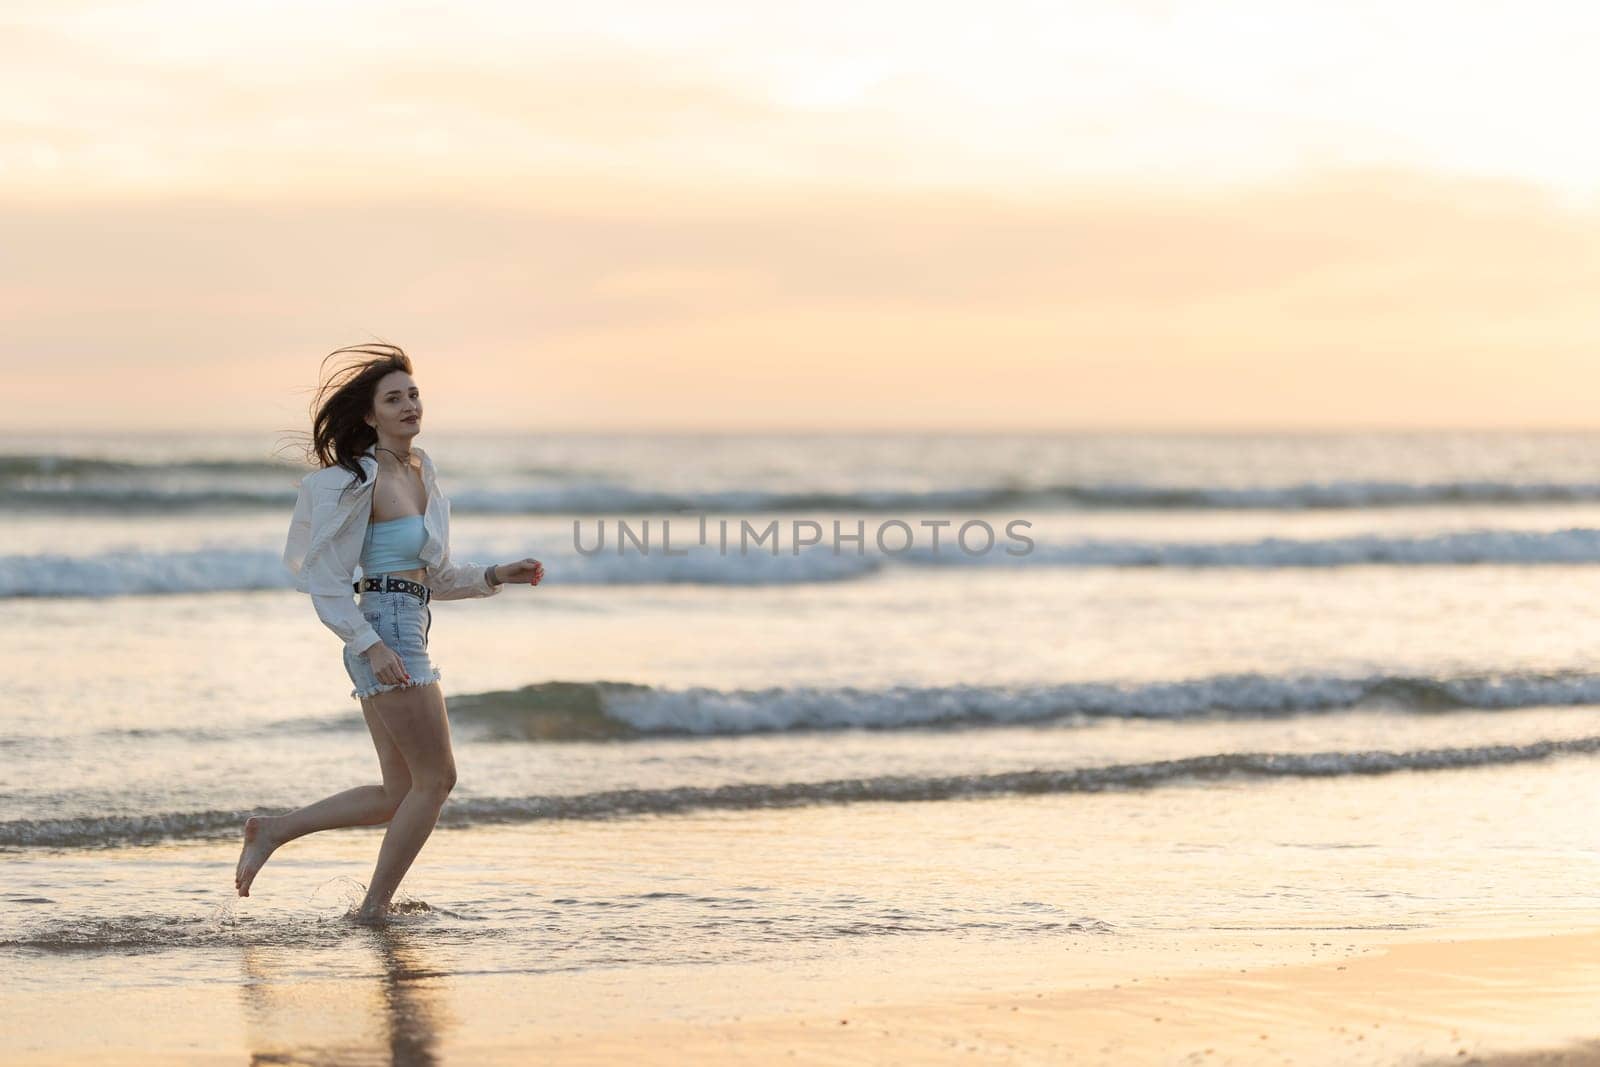 A woman is running on the beach with the sun setting in the background by Studia72